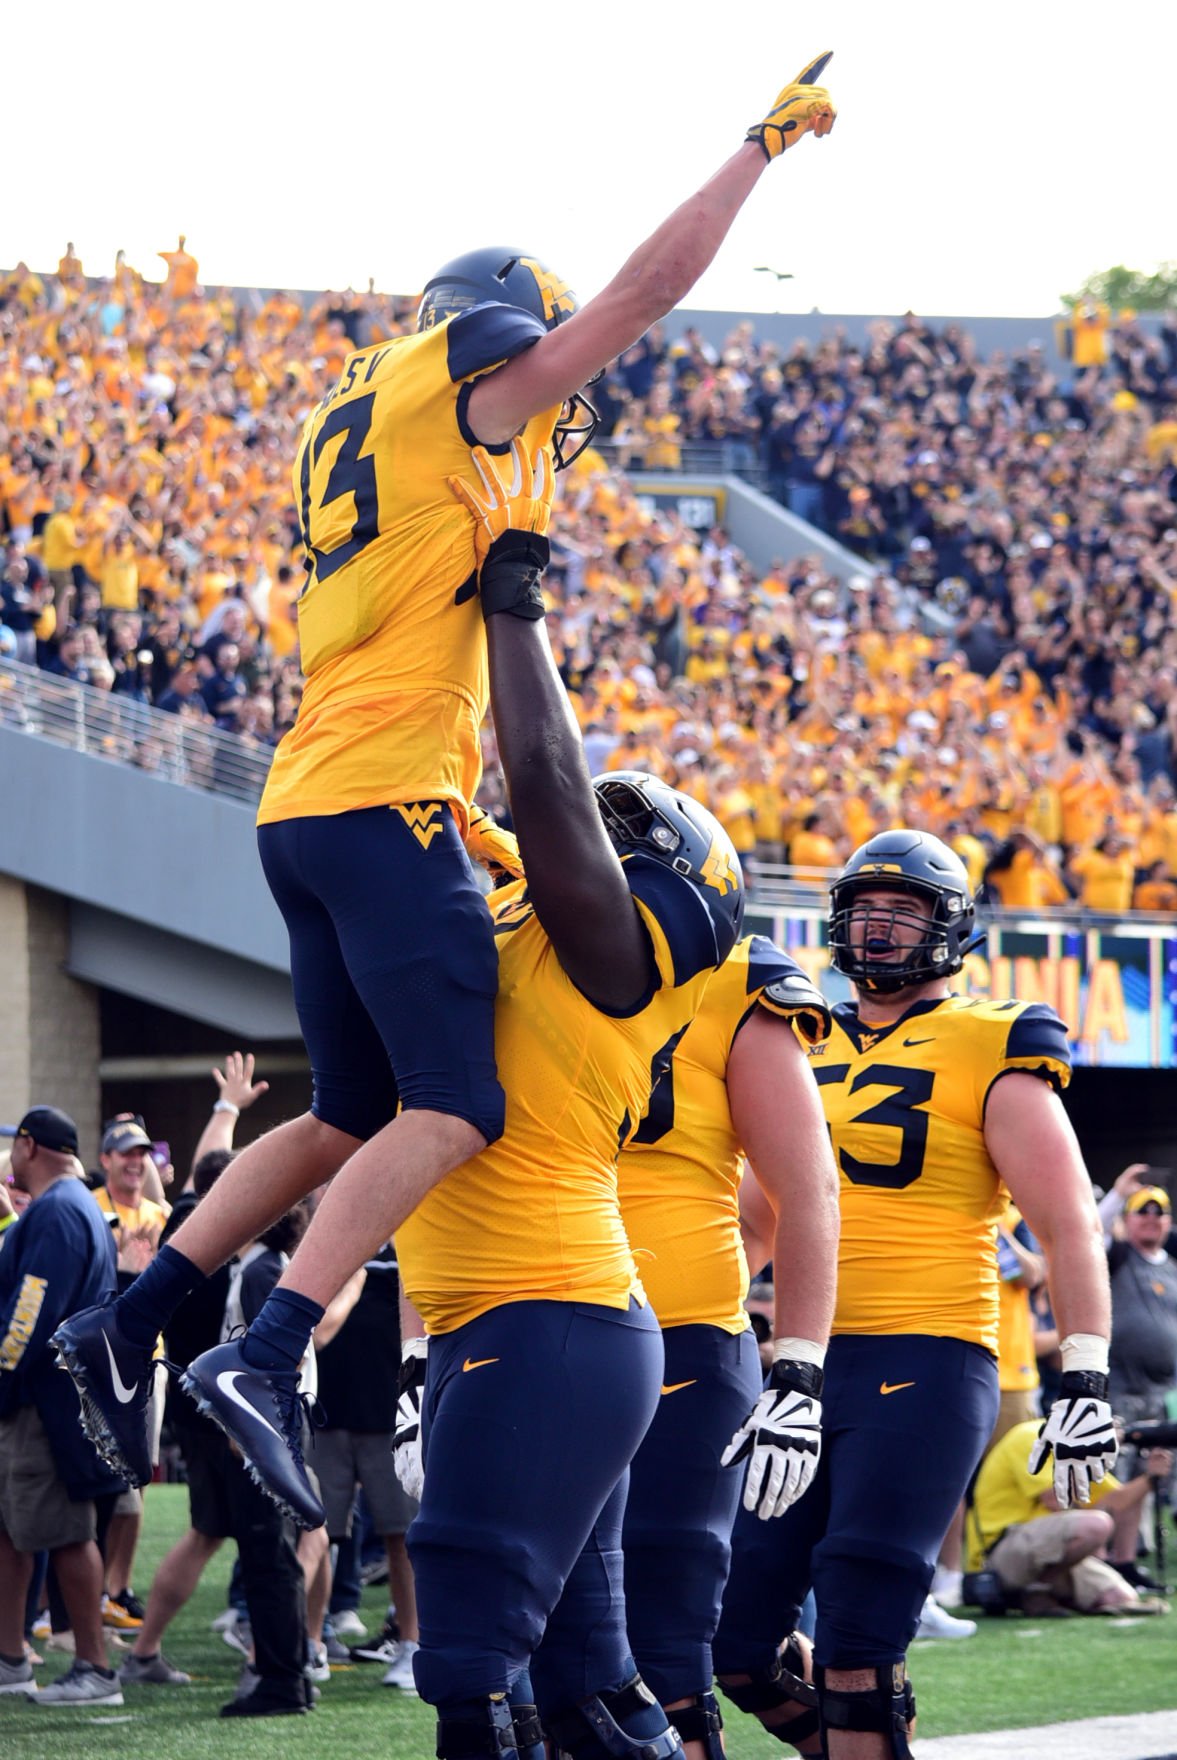 West Virginia impresses with 35-6 drubbing of Kansas State | Sports